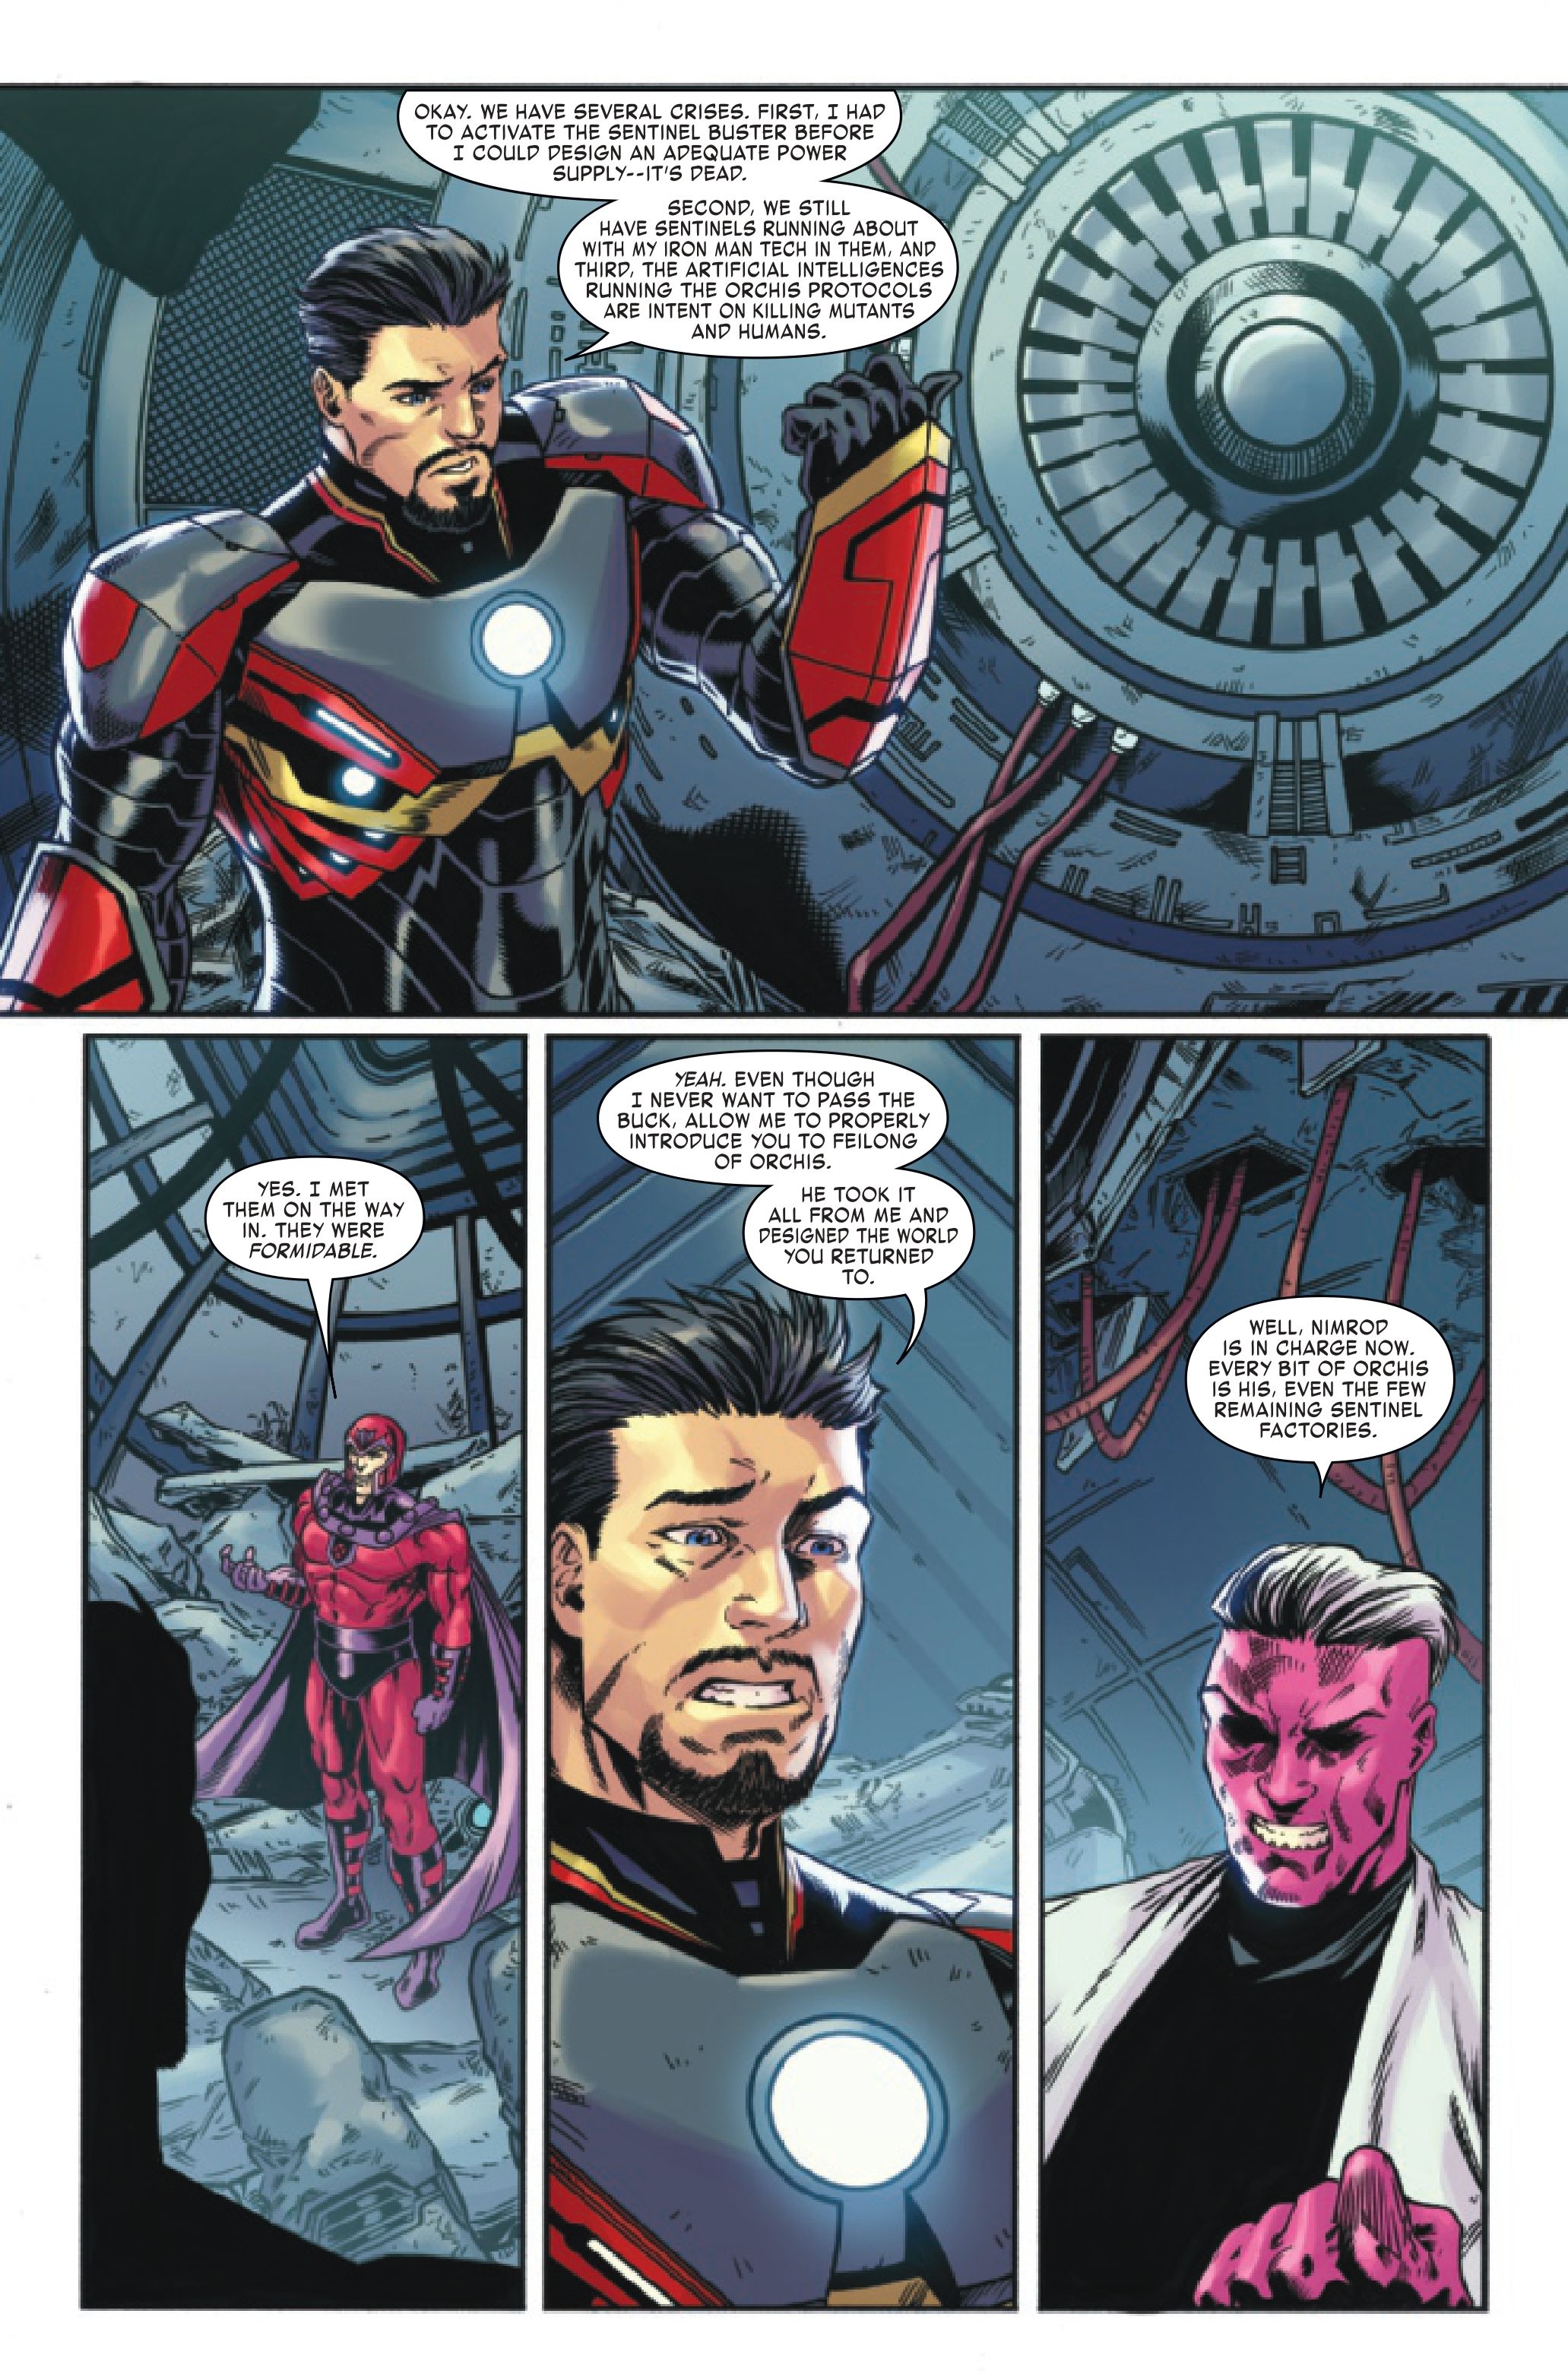 EXCLUSIVE: Iron Man and Magneto Team With a Villain to Combat the Fall of X